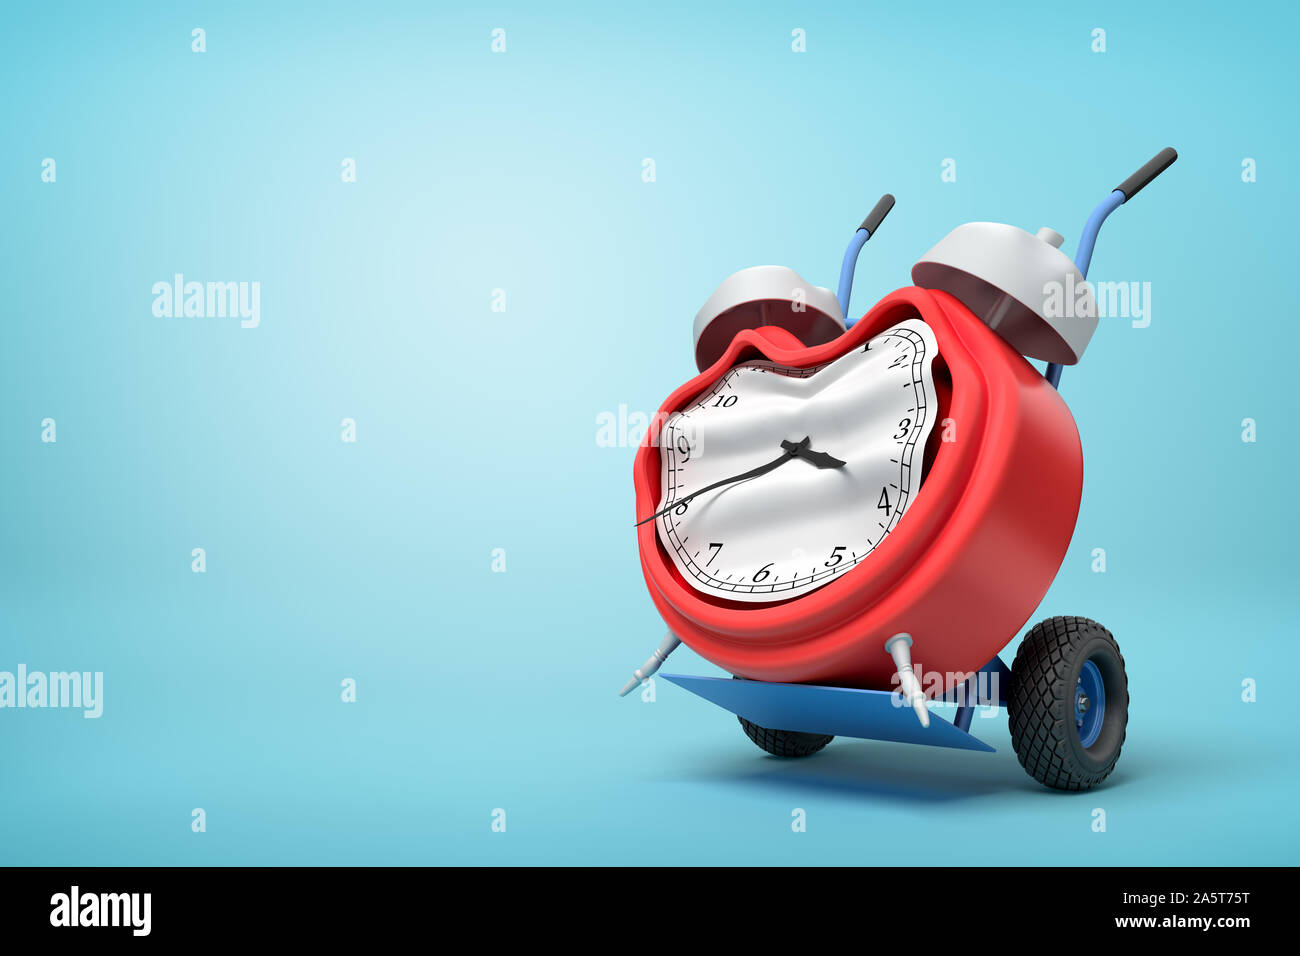 3d rendering of smashed broken alarm clock on a hand truck on blue background Stock Photo